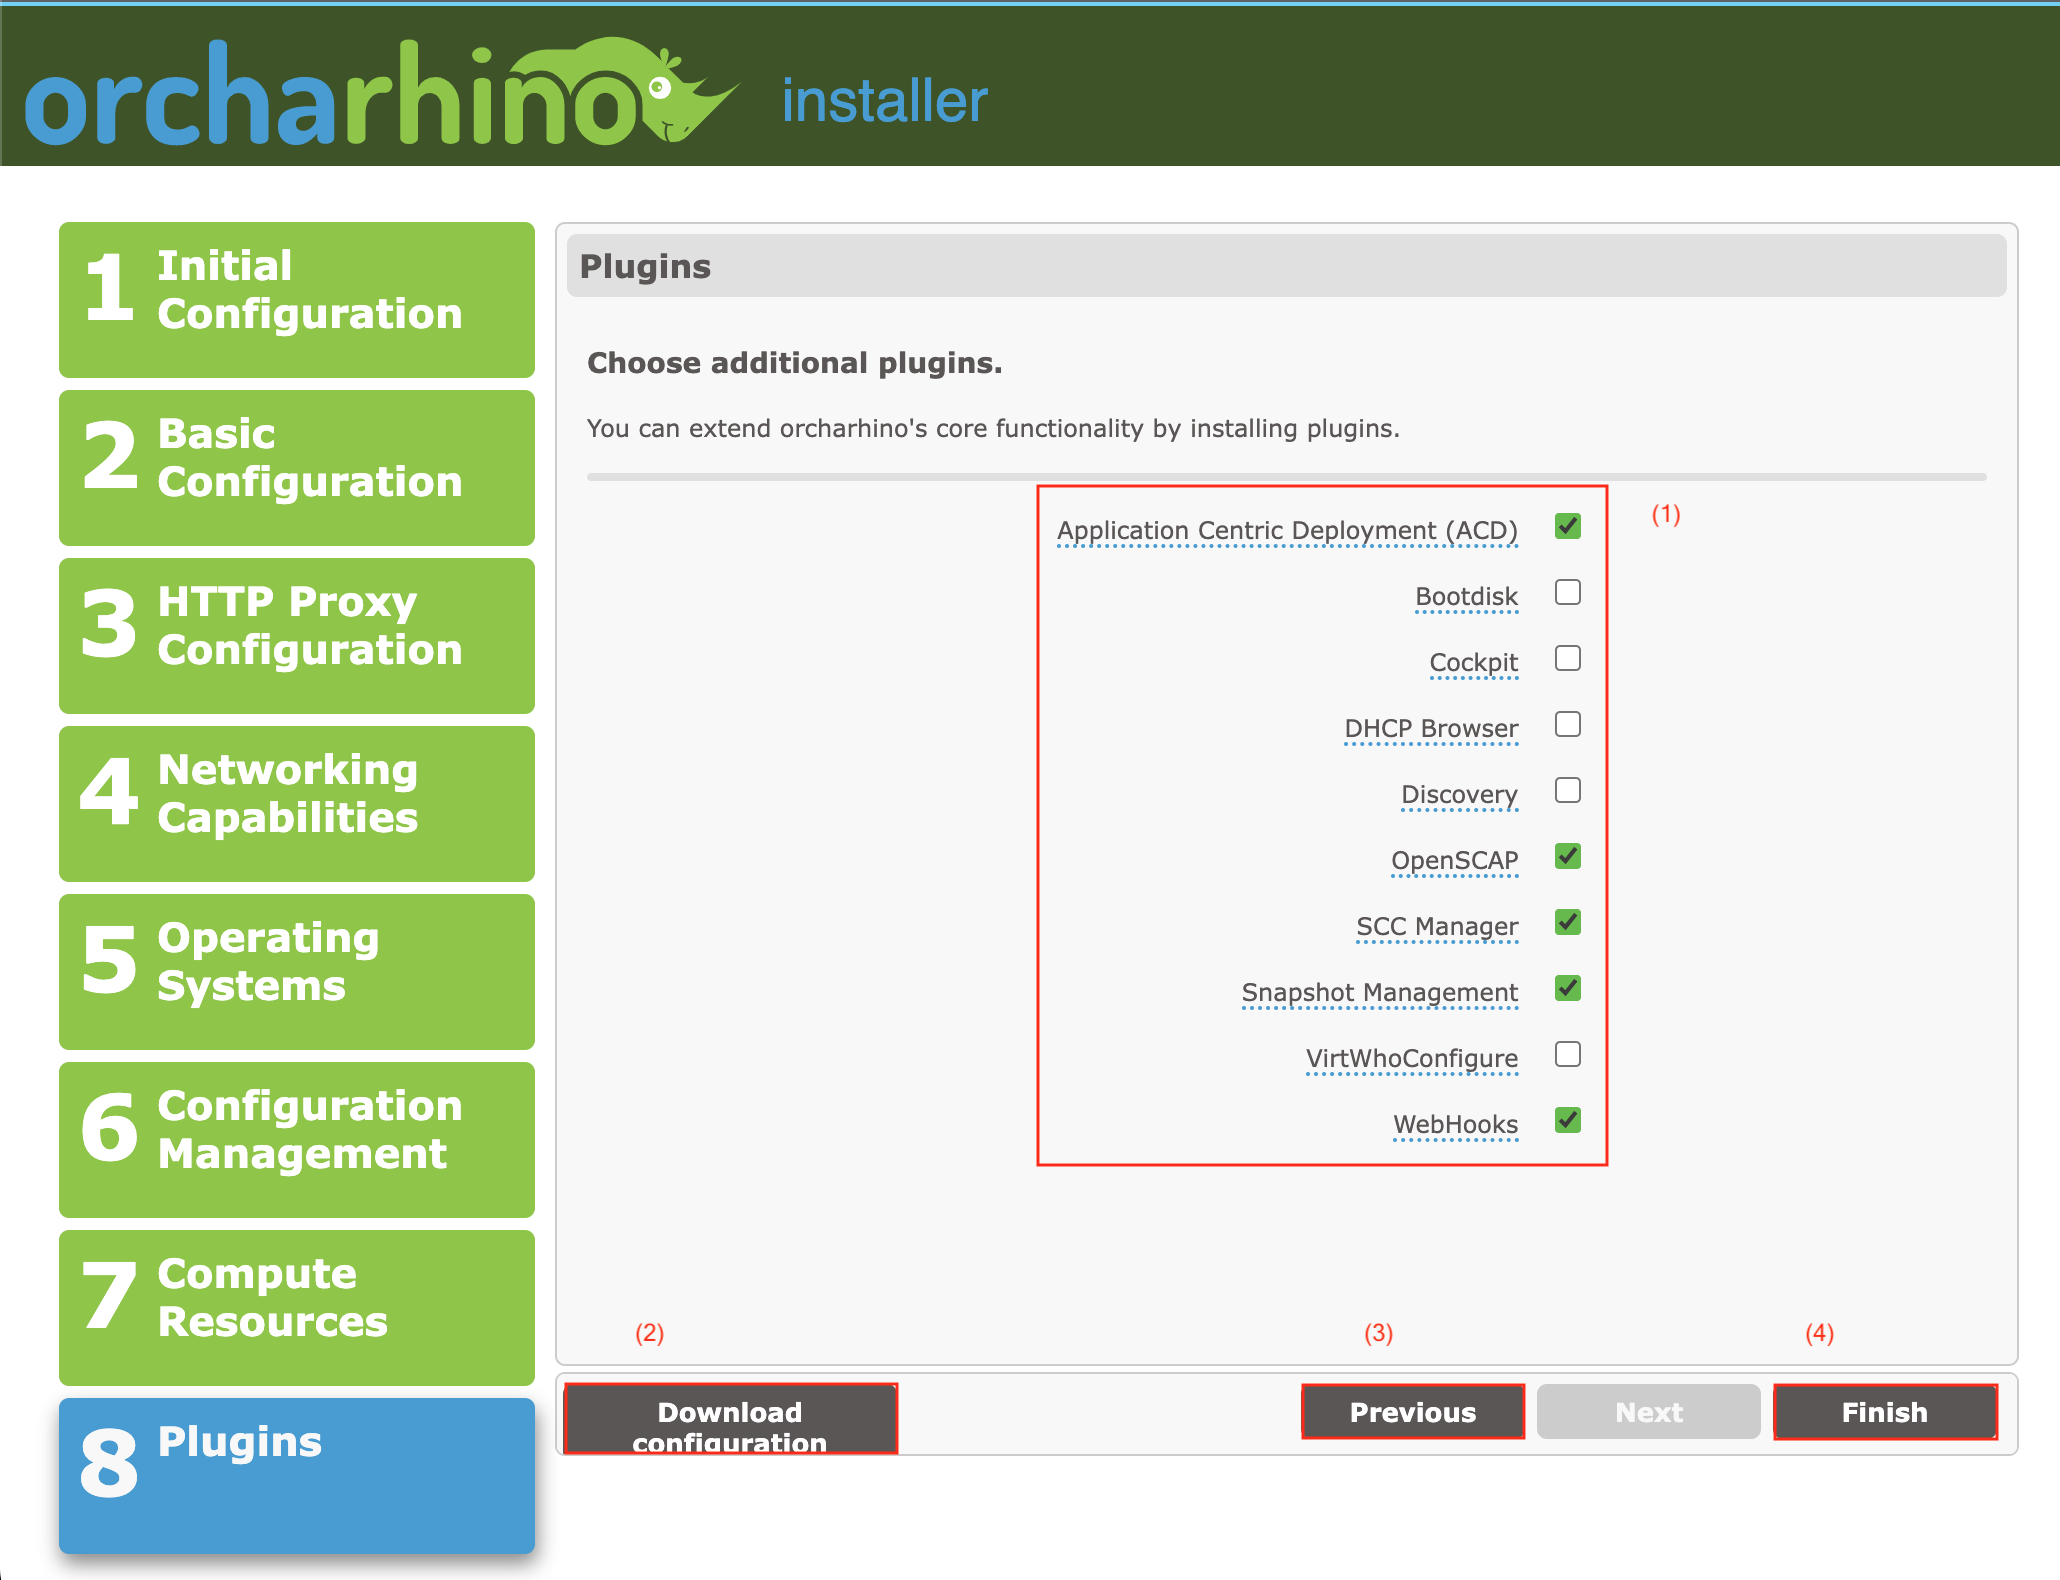 Selecting plug-ins in orcharhino Installer GUI